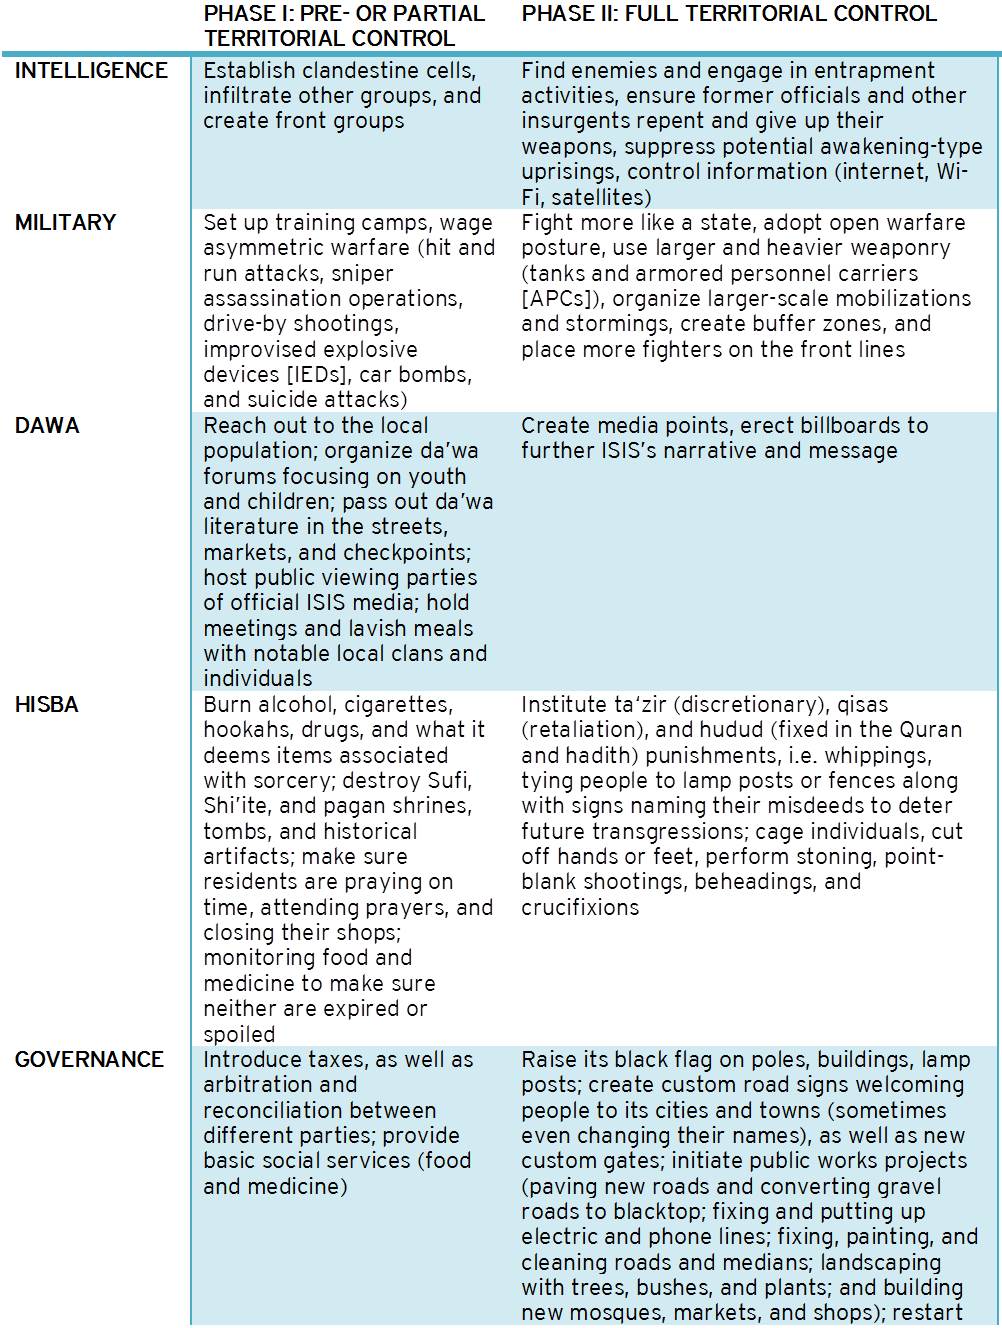 isis_governance_table (2)